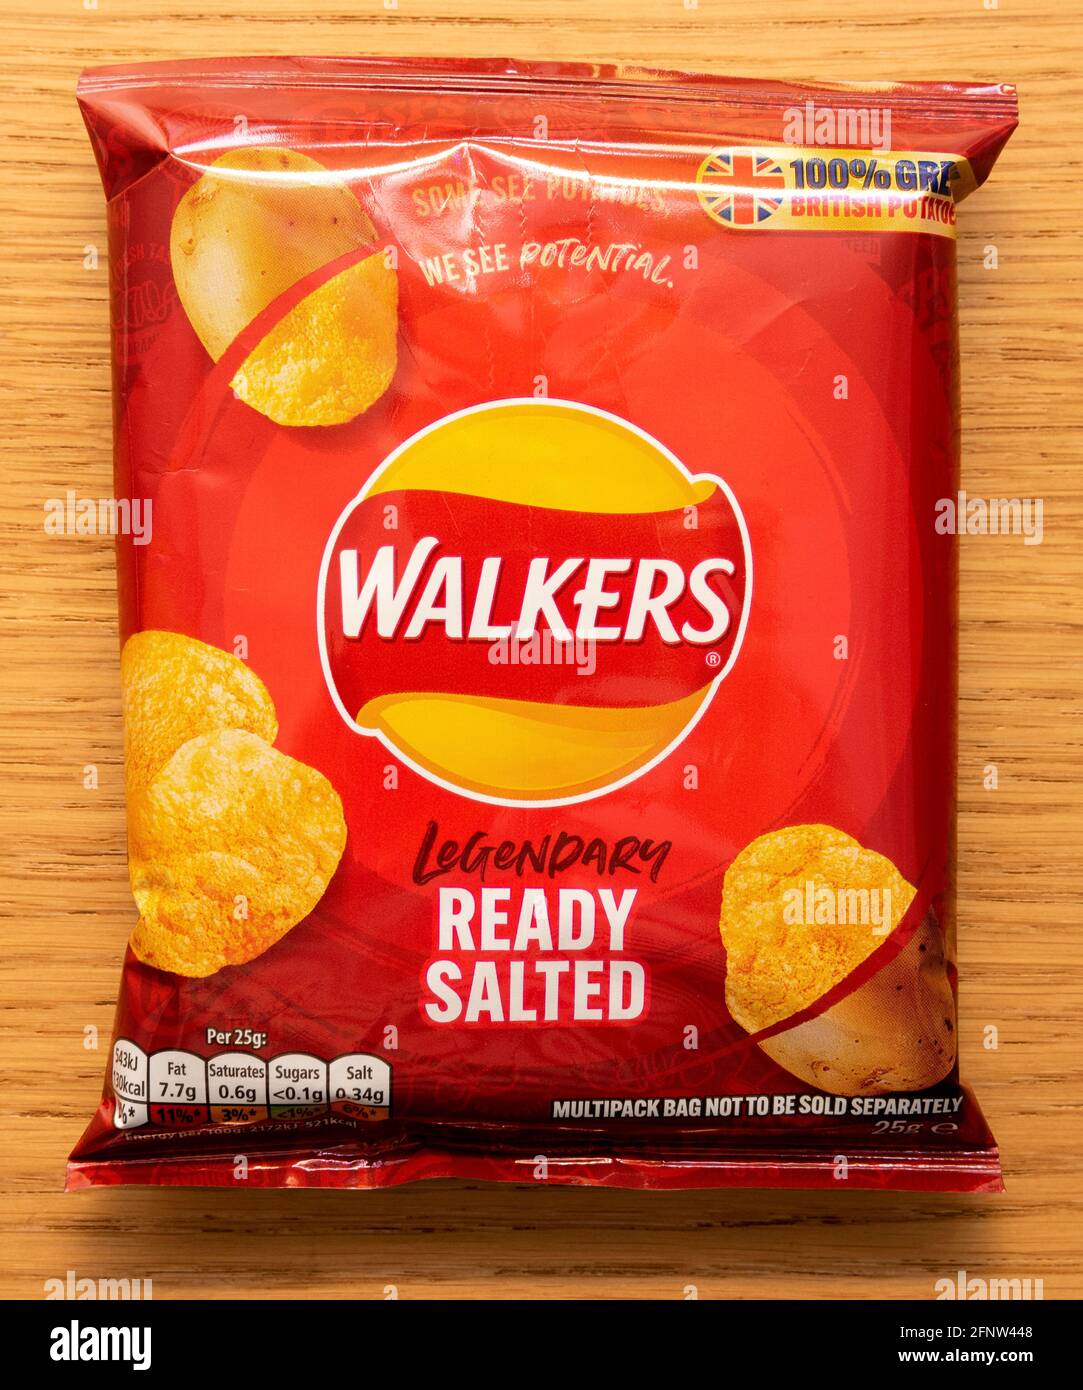 A packet of Walkers legendary ready salted potato crisps on a wood effect background Stock Photo